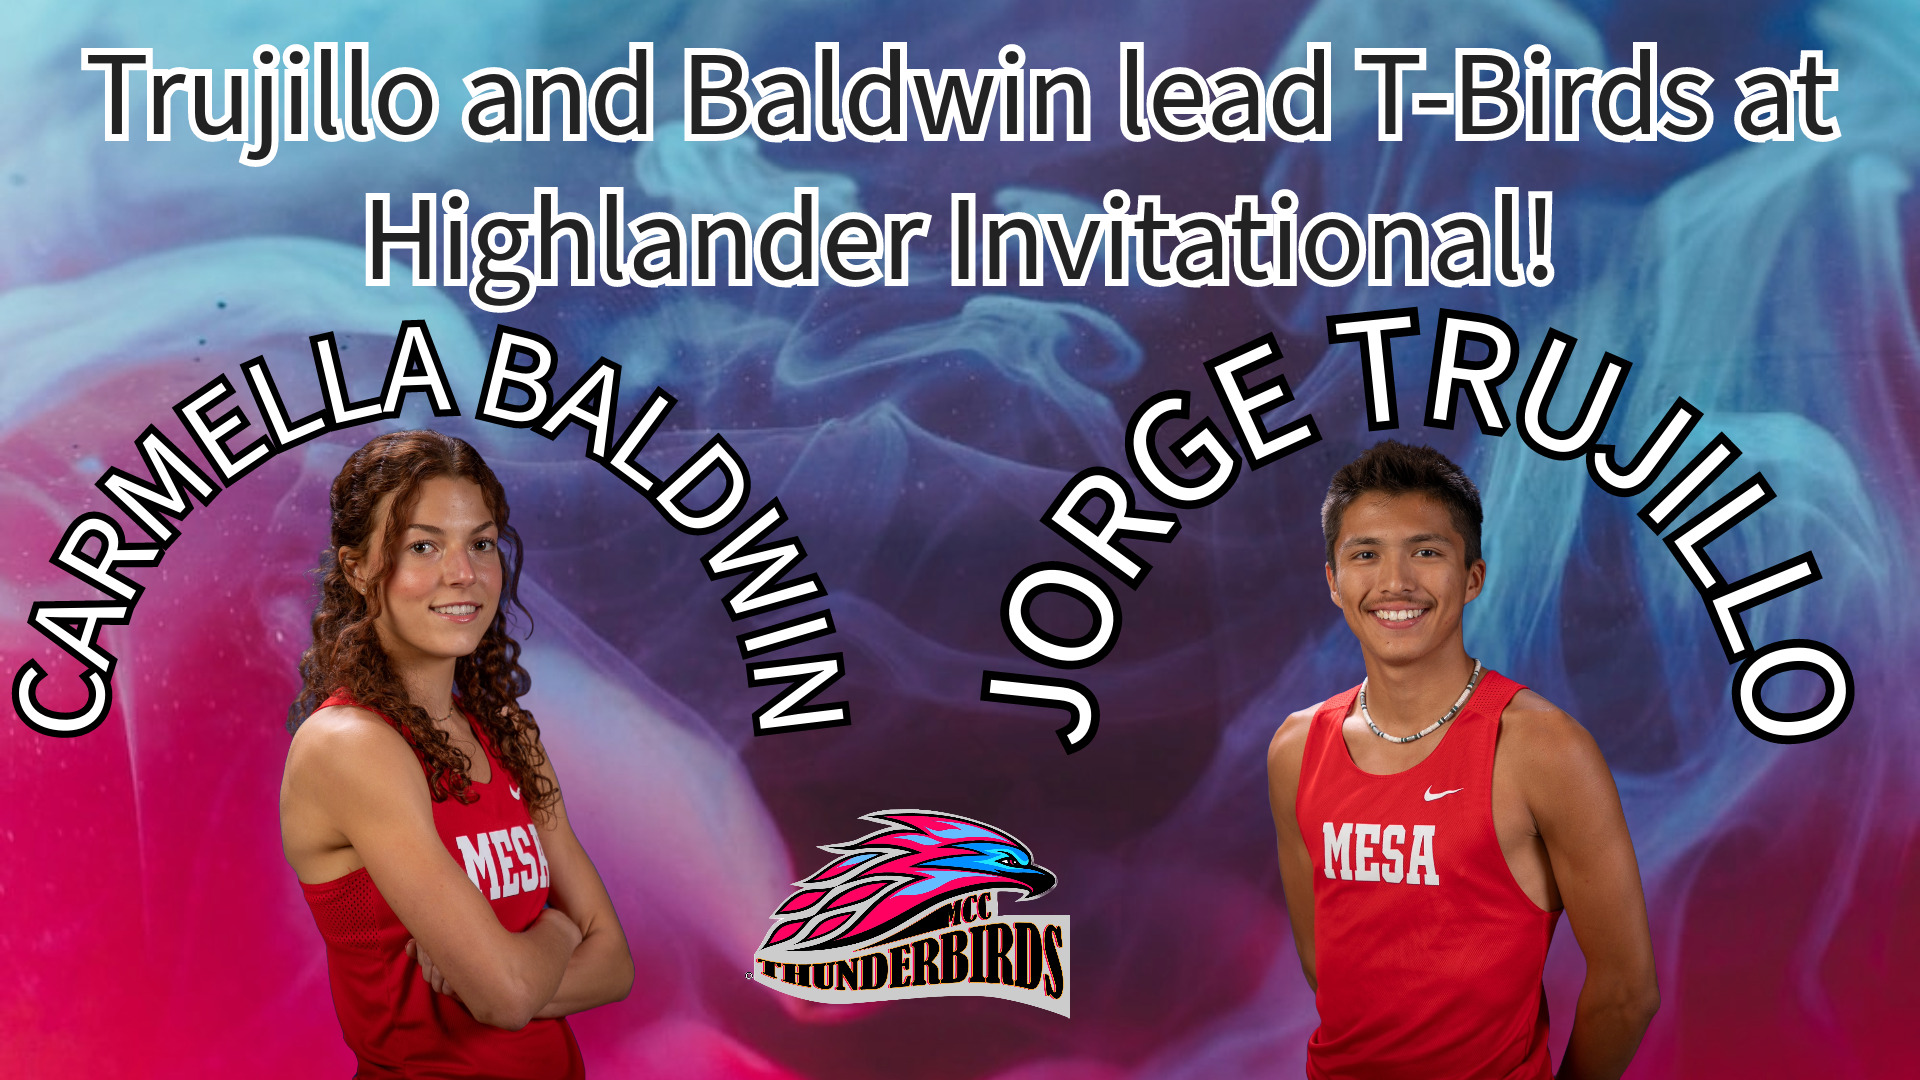 Trujillo and Baldwin lead the way for MCC Cross Country at the Highlander Invitational